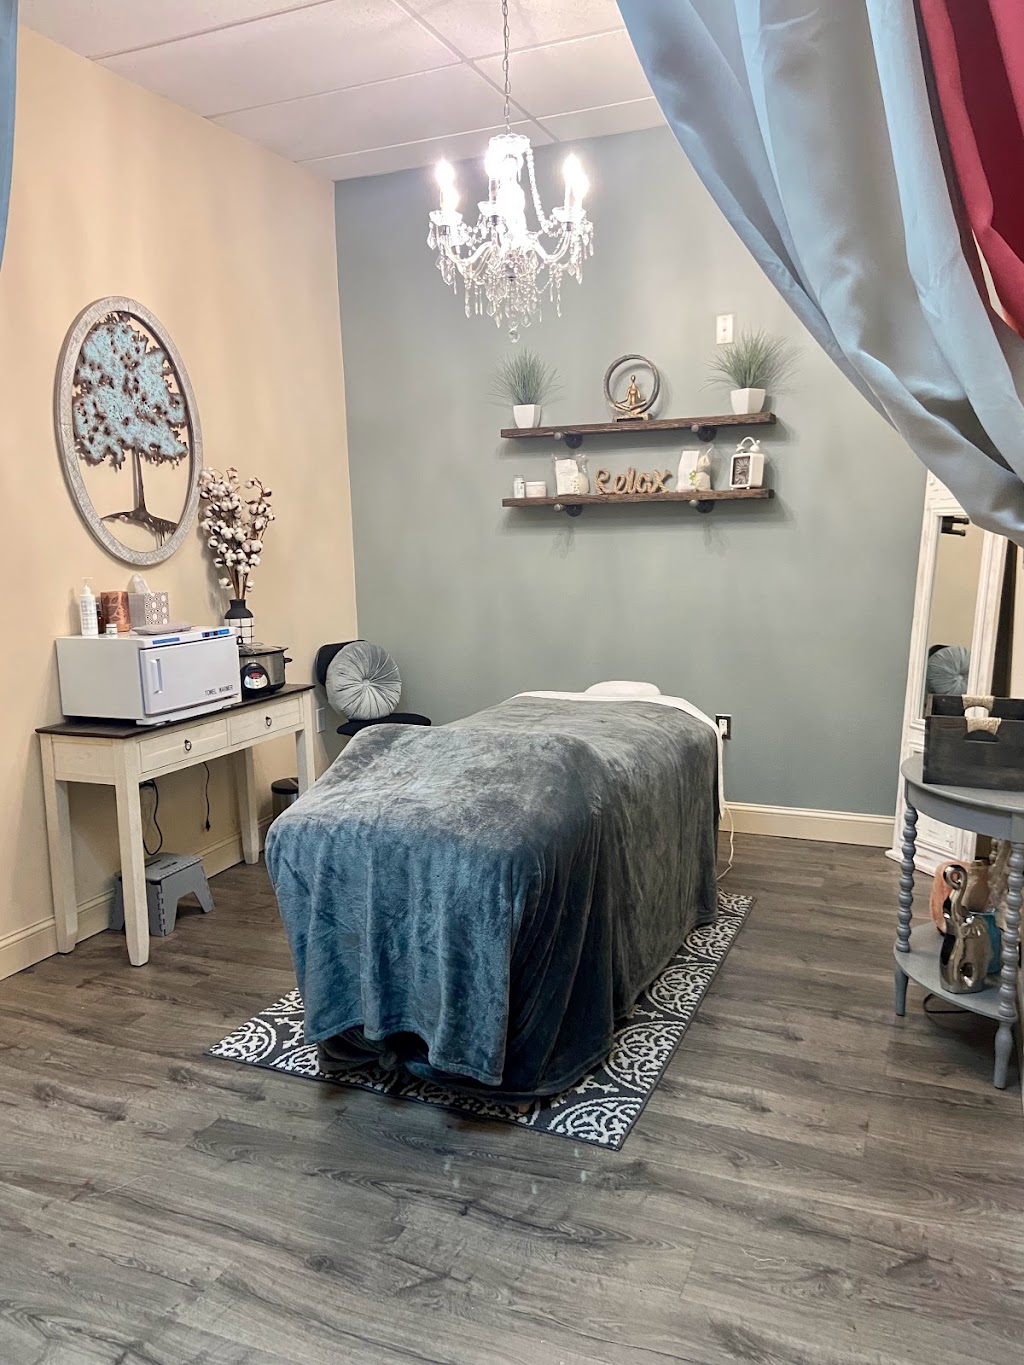 Whole Beauty Bar | 44 Manchester Ave suite k, Forked River, NJ 08731 | Phone: (609) 339-2553